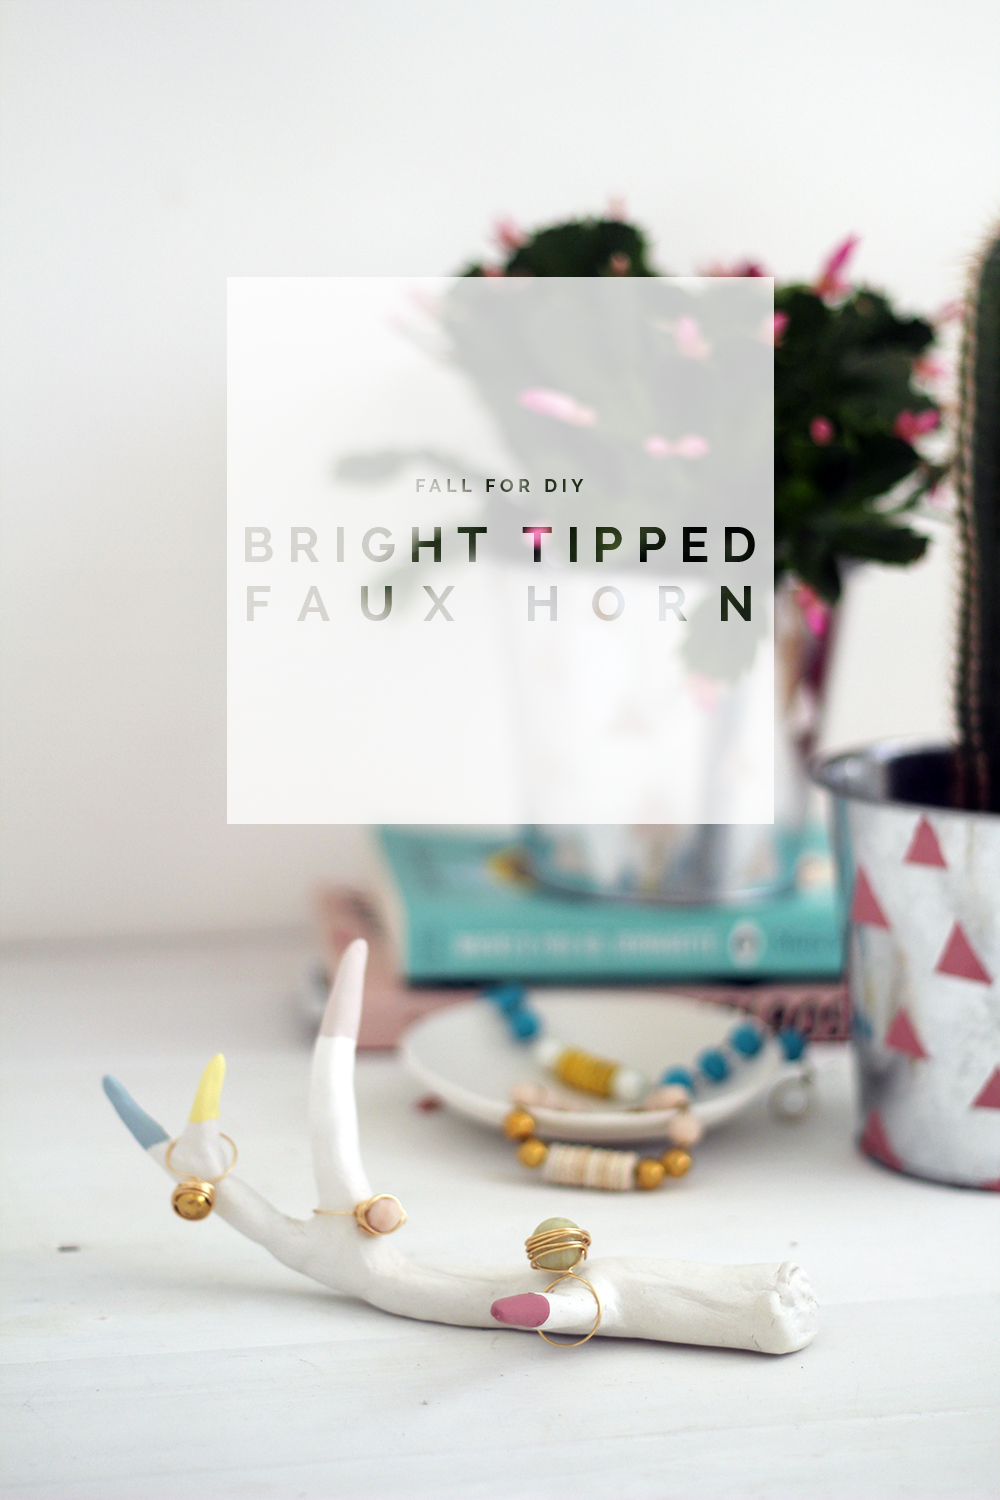 Fall for diy bright tipped faux horn